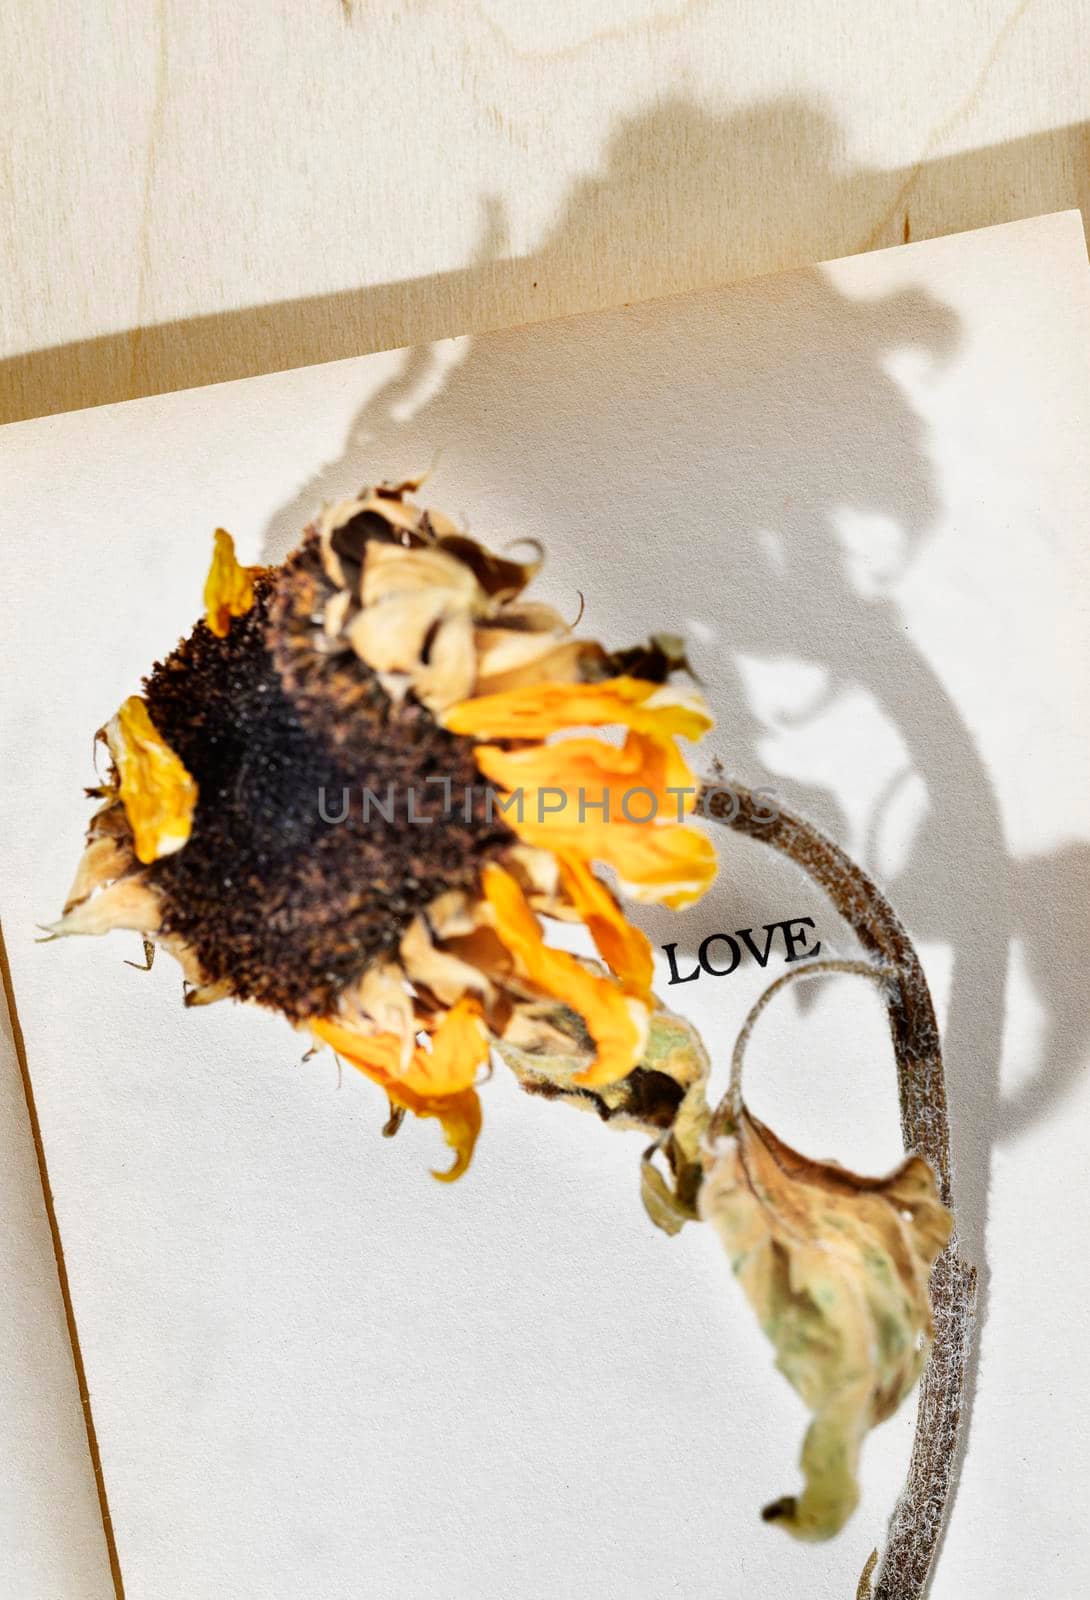 Word LOVE on book and dried flower by victimewalker